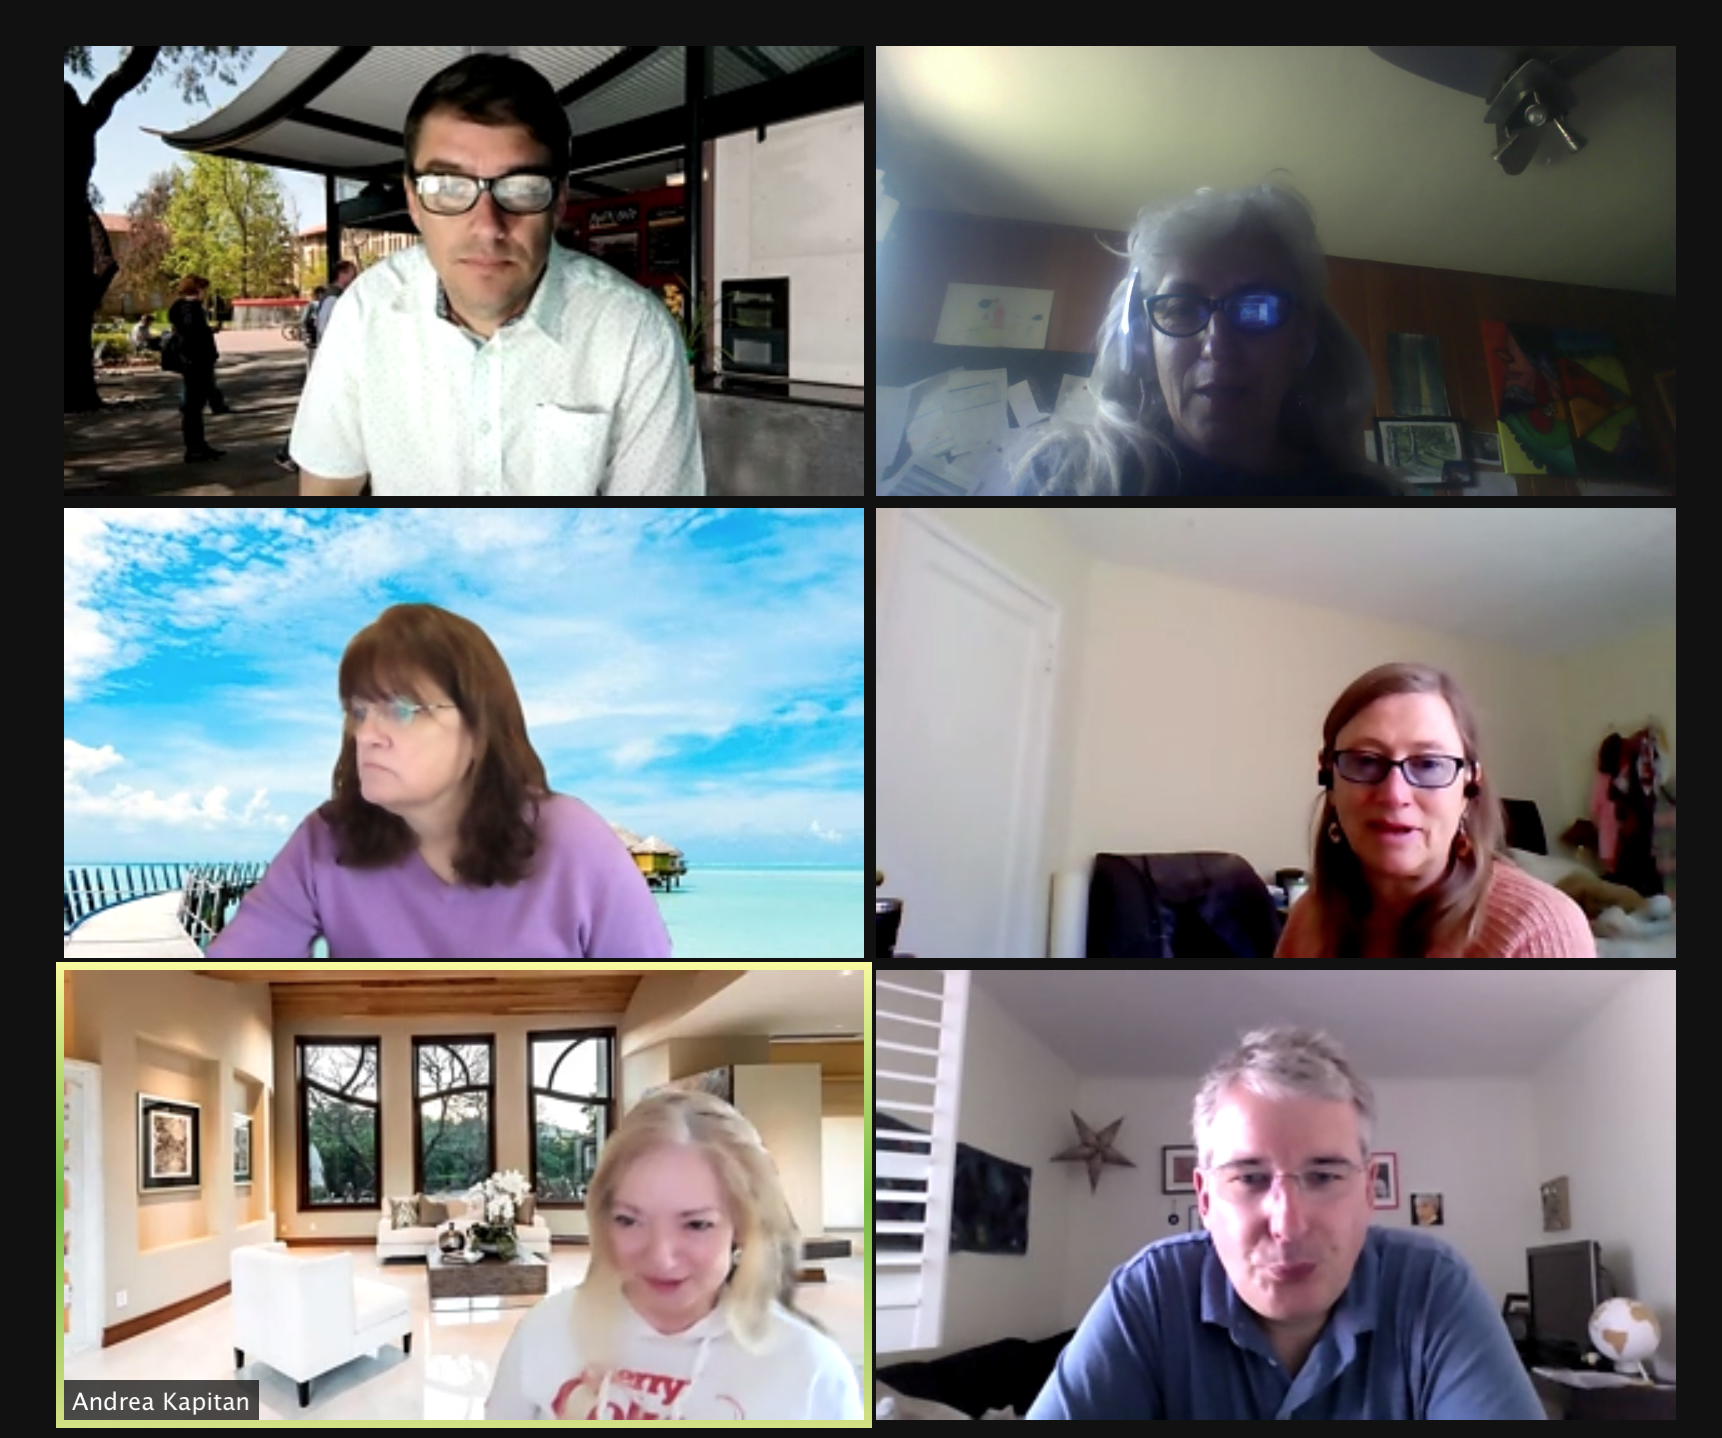 A Zoom screenshot of the Stanford WebCamp 2021 organizing team.